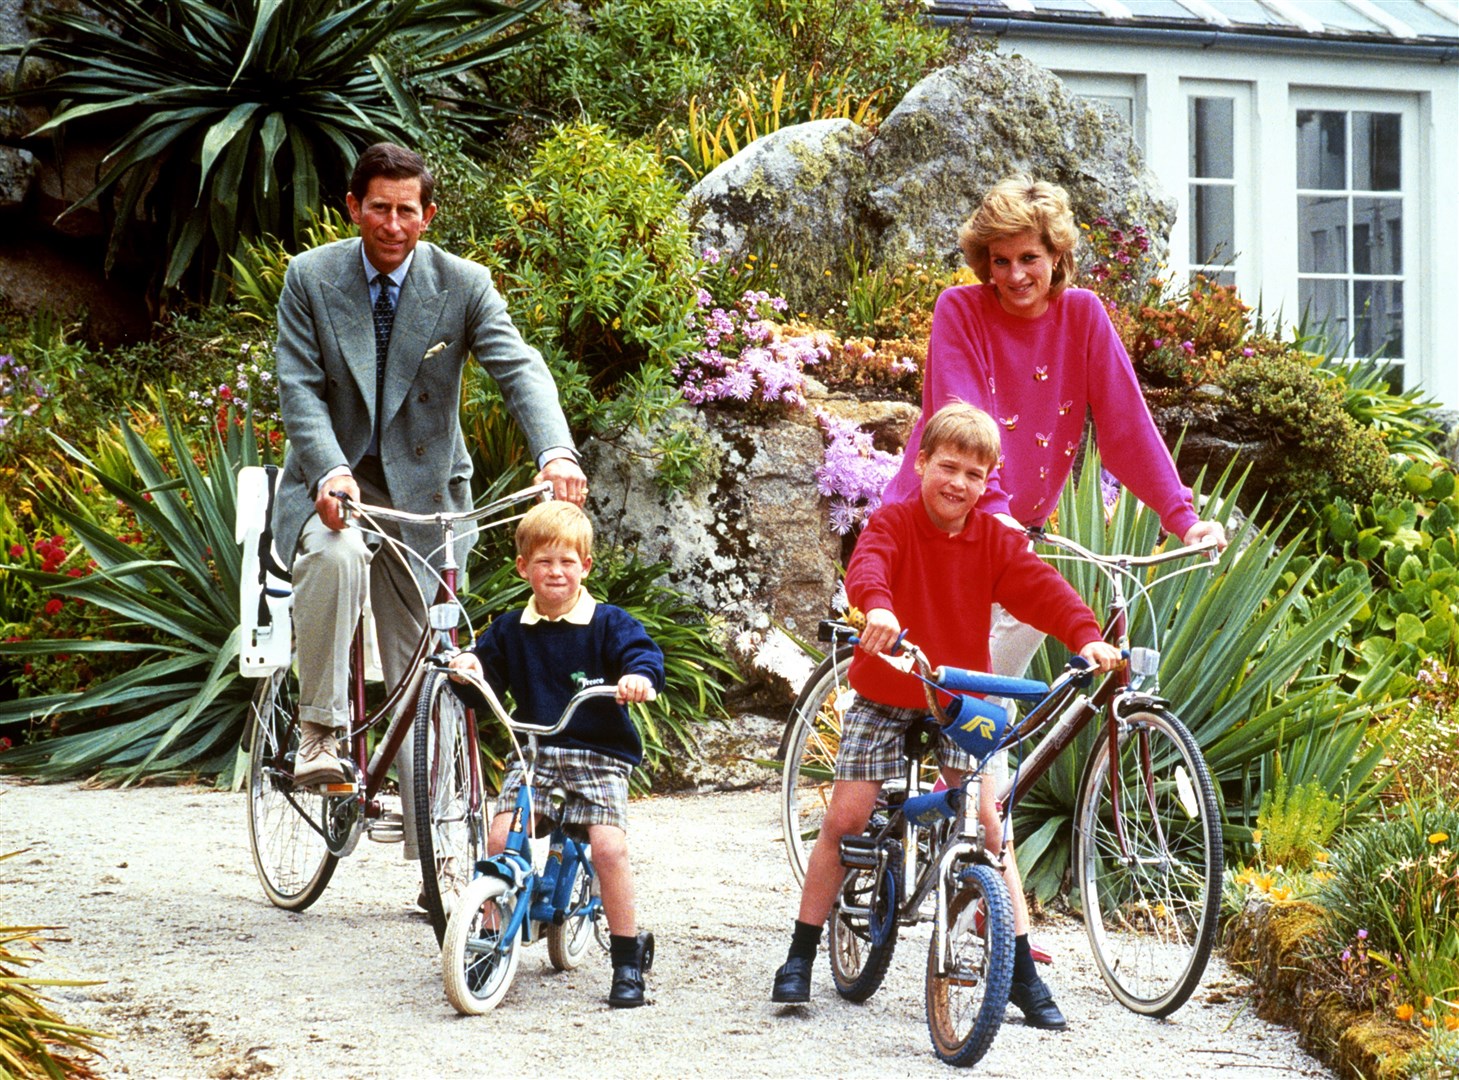 The Waleses prepare for a cycle ride in Tresco during their holiday in the Scilly Isles in 1989 (PA)